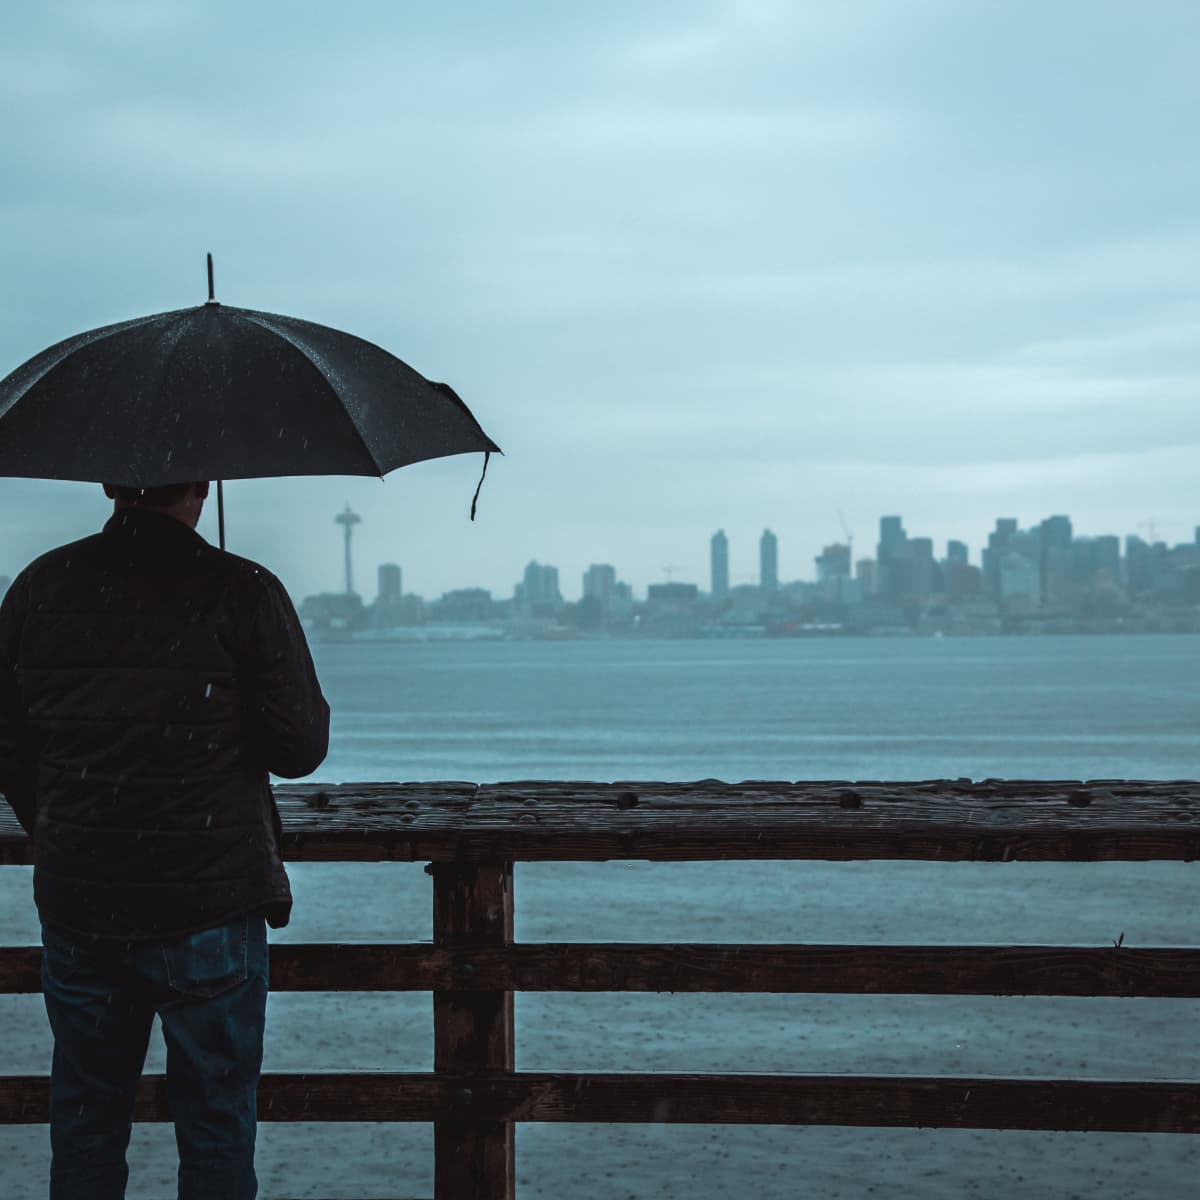 25 Great Songs About Rain To Listen To When It's Pouring